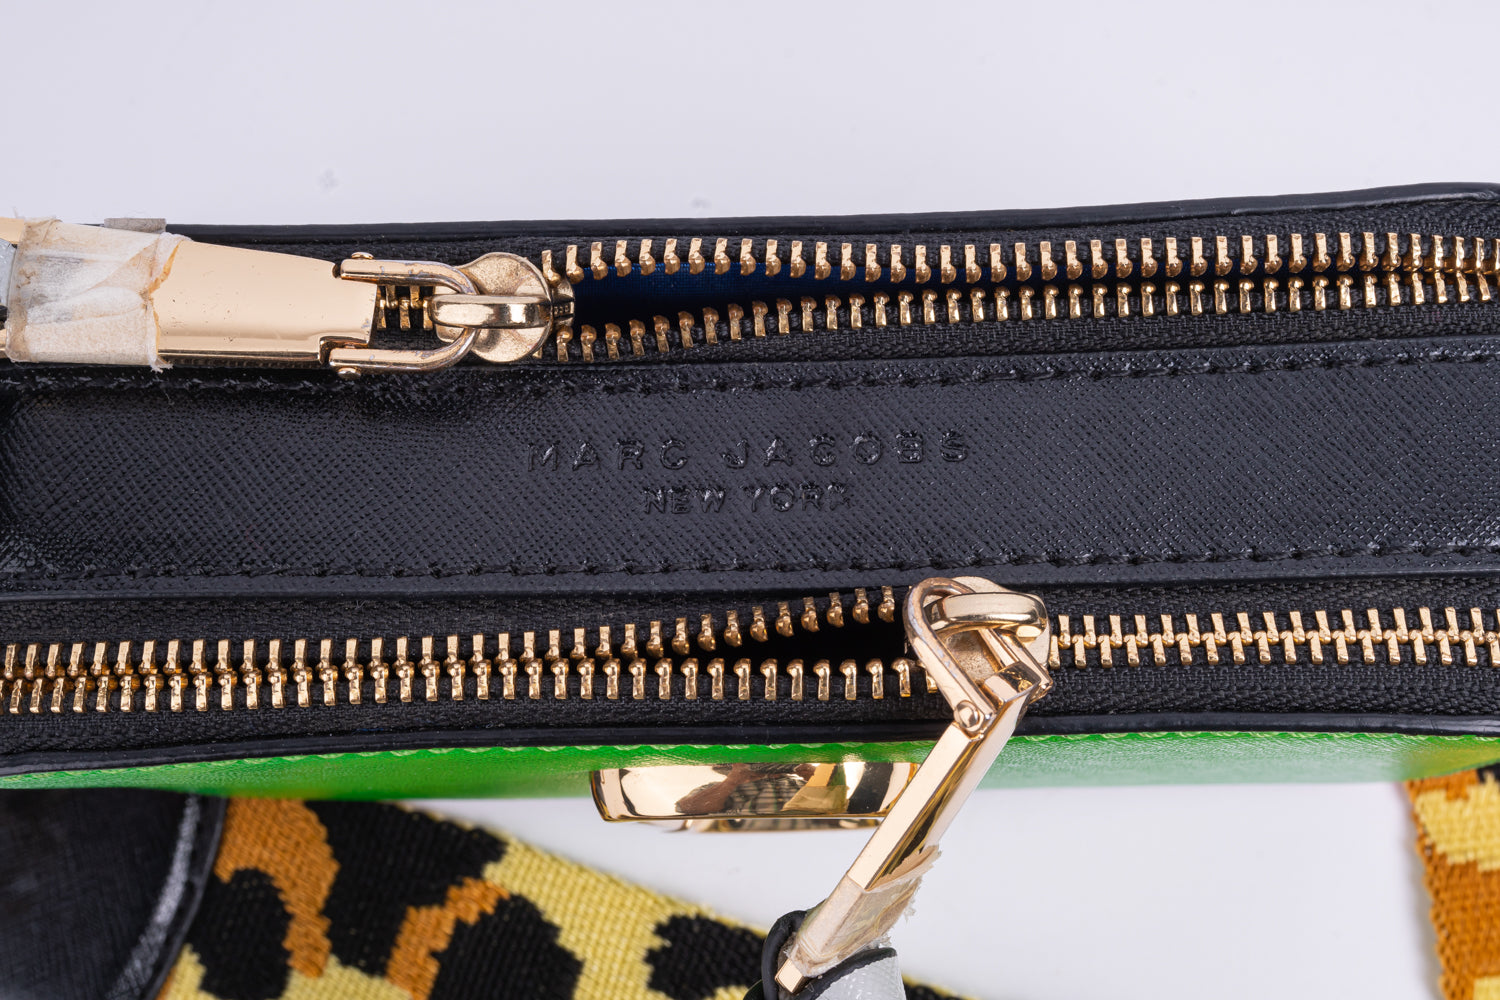 Marc Jacobs Green Snapshot With Leopard Strap